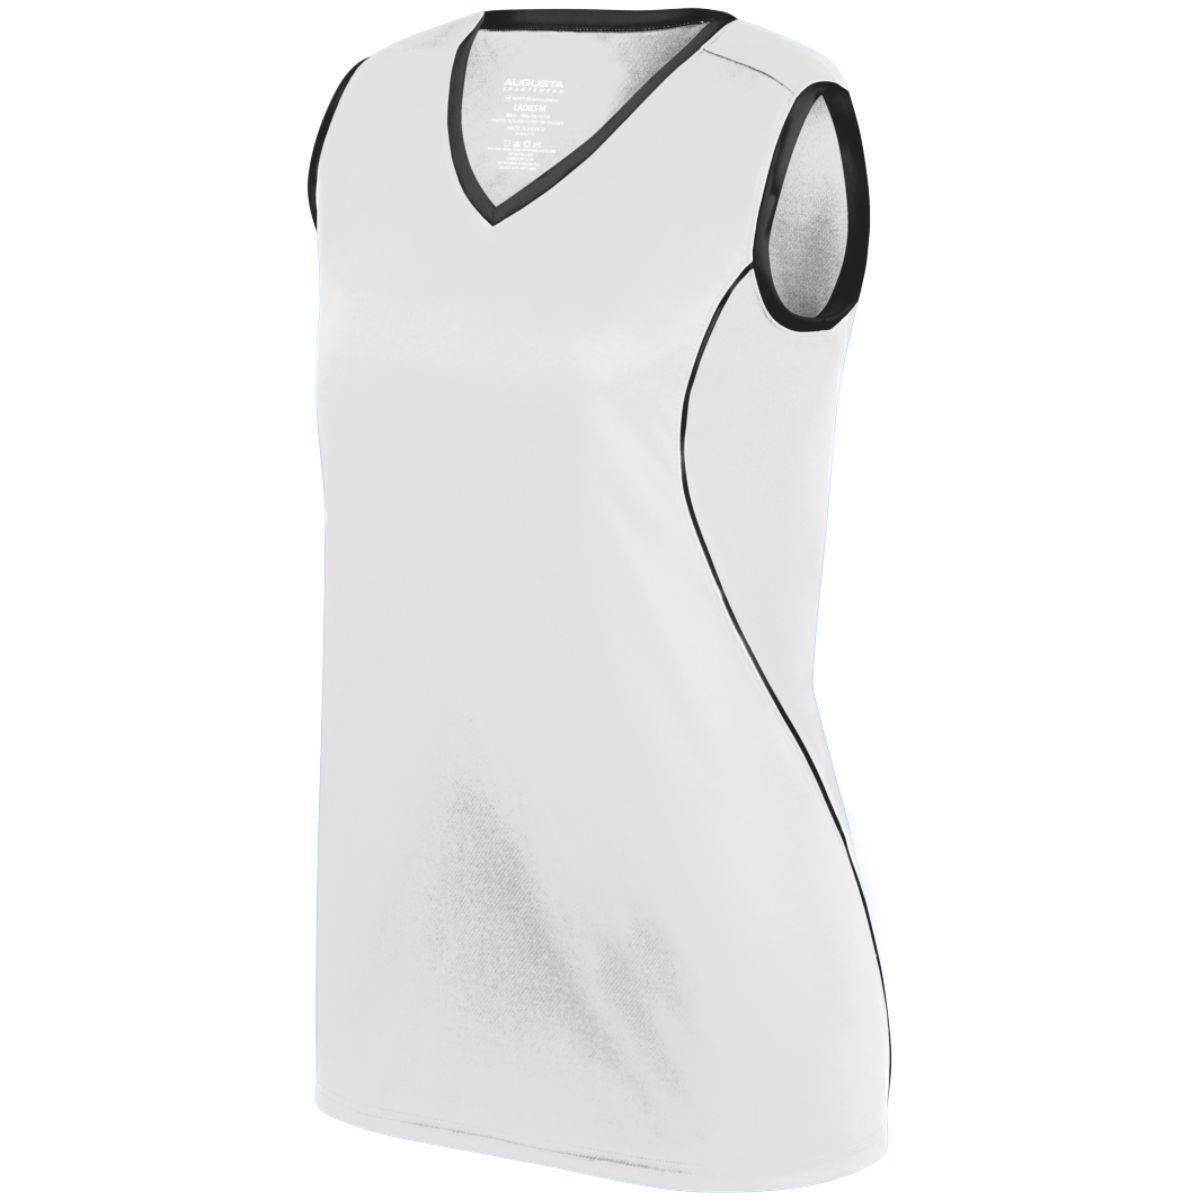 Augusta Sportswear Ladies Firebolt Jersey in White/Black  -Part of the Ladies, Ladies-Jersey, Augusta-Products, Softball, Shirts product lines at KanaleyCreations.com